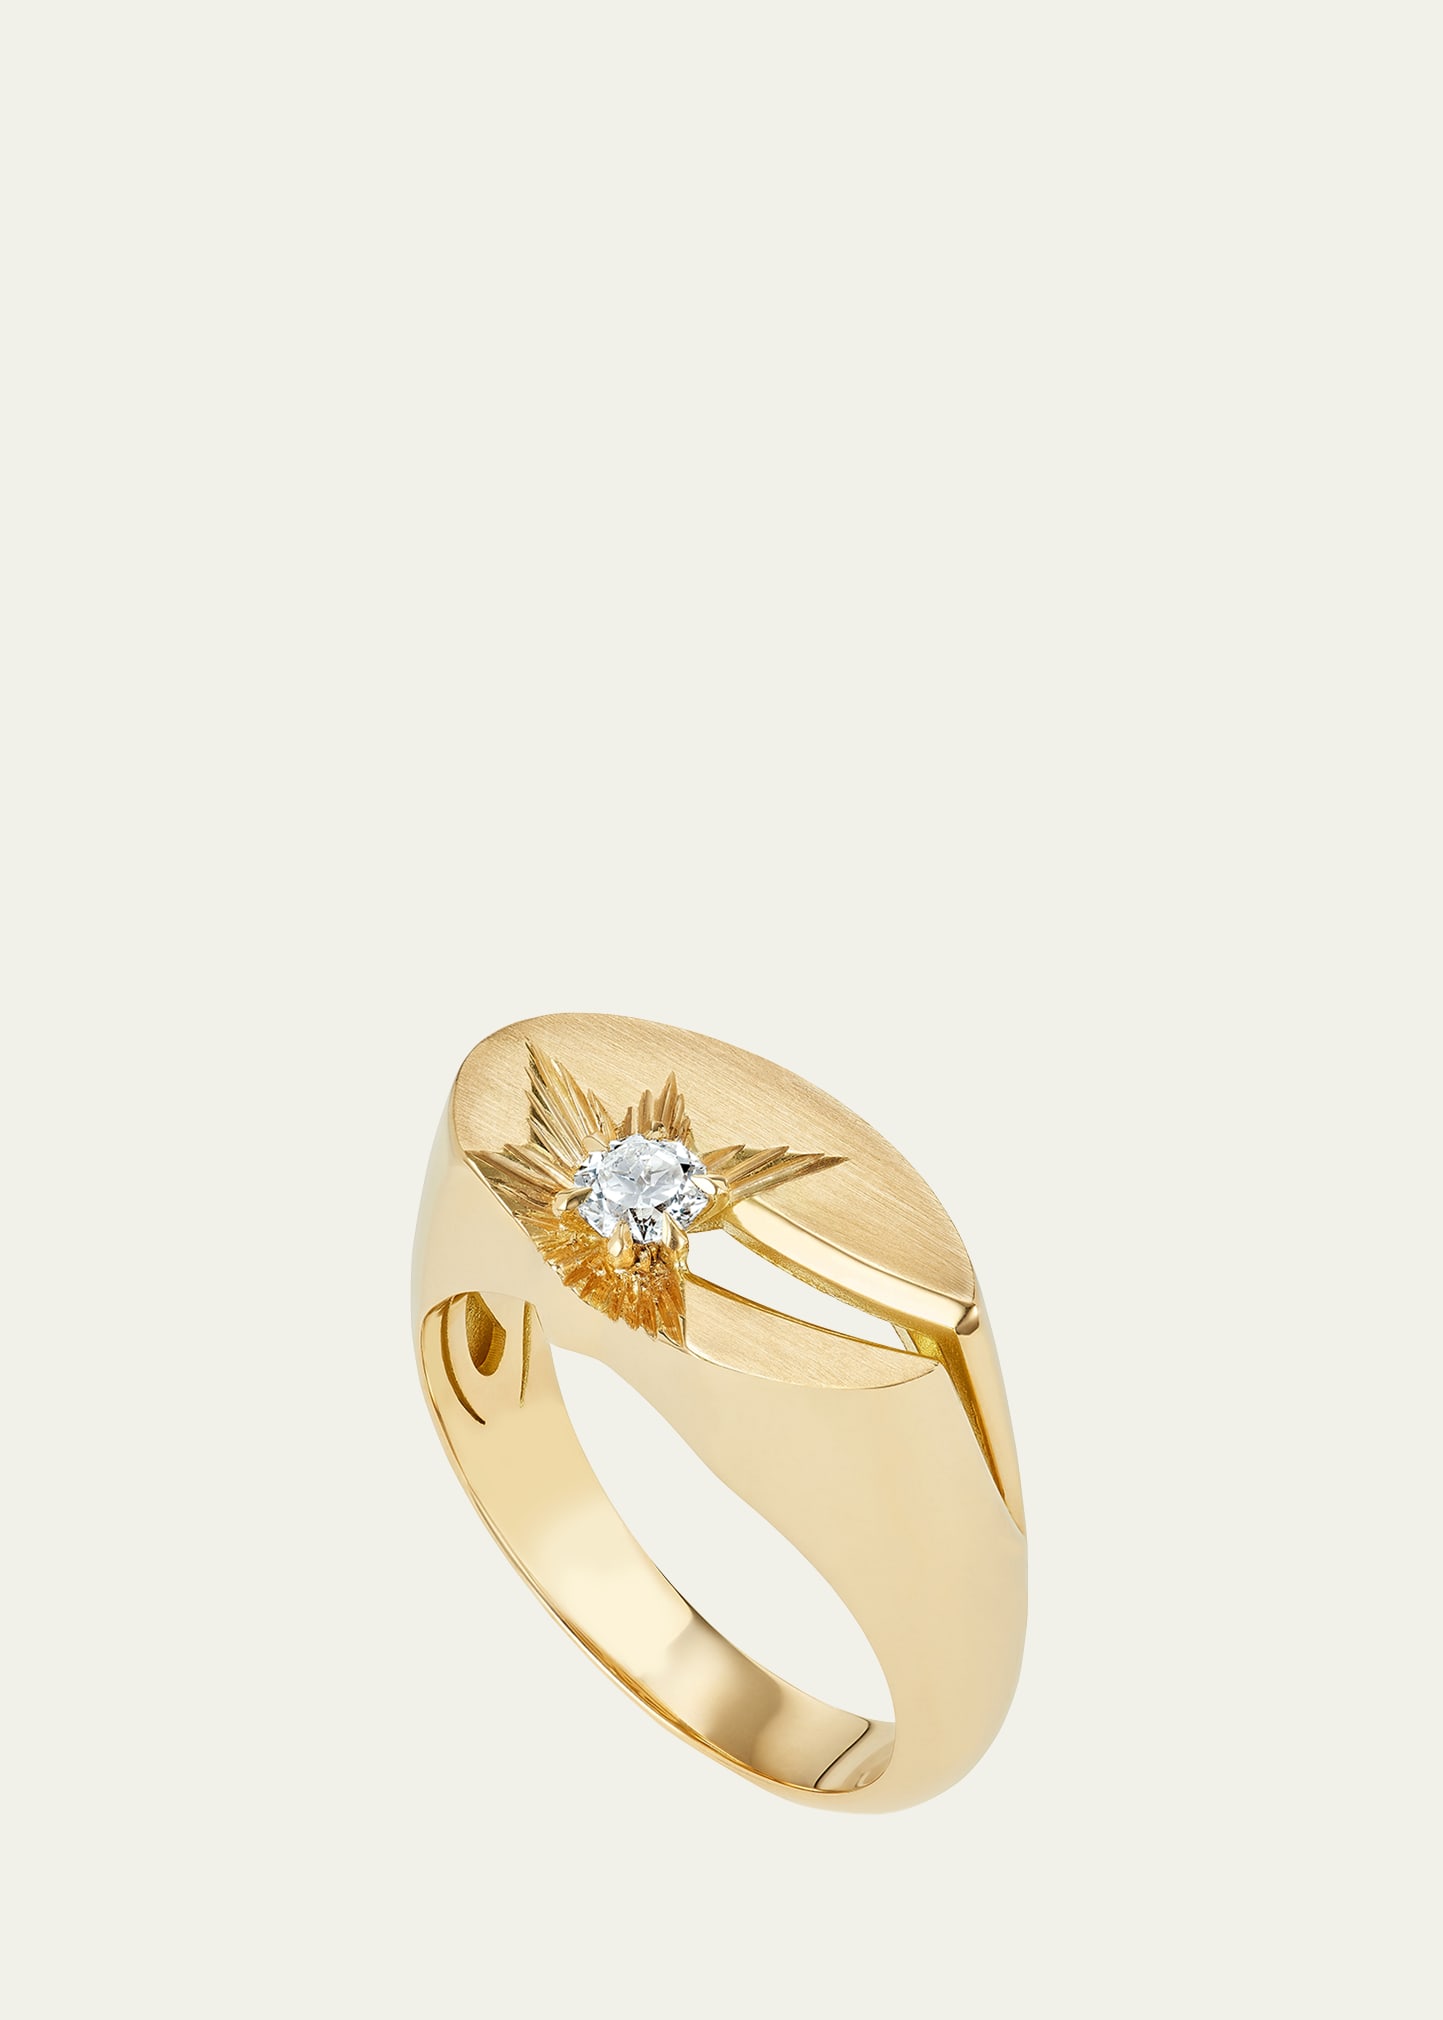 Stephen Webster 18k Yellow Gold Collision Ring With Stellar Diamond